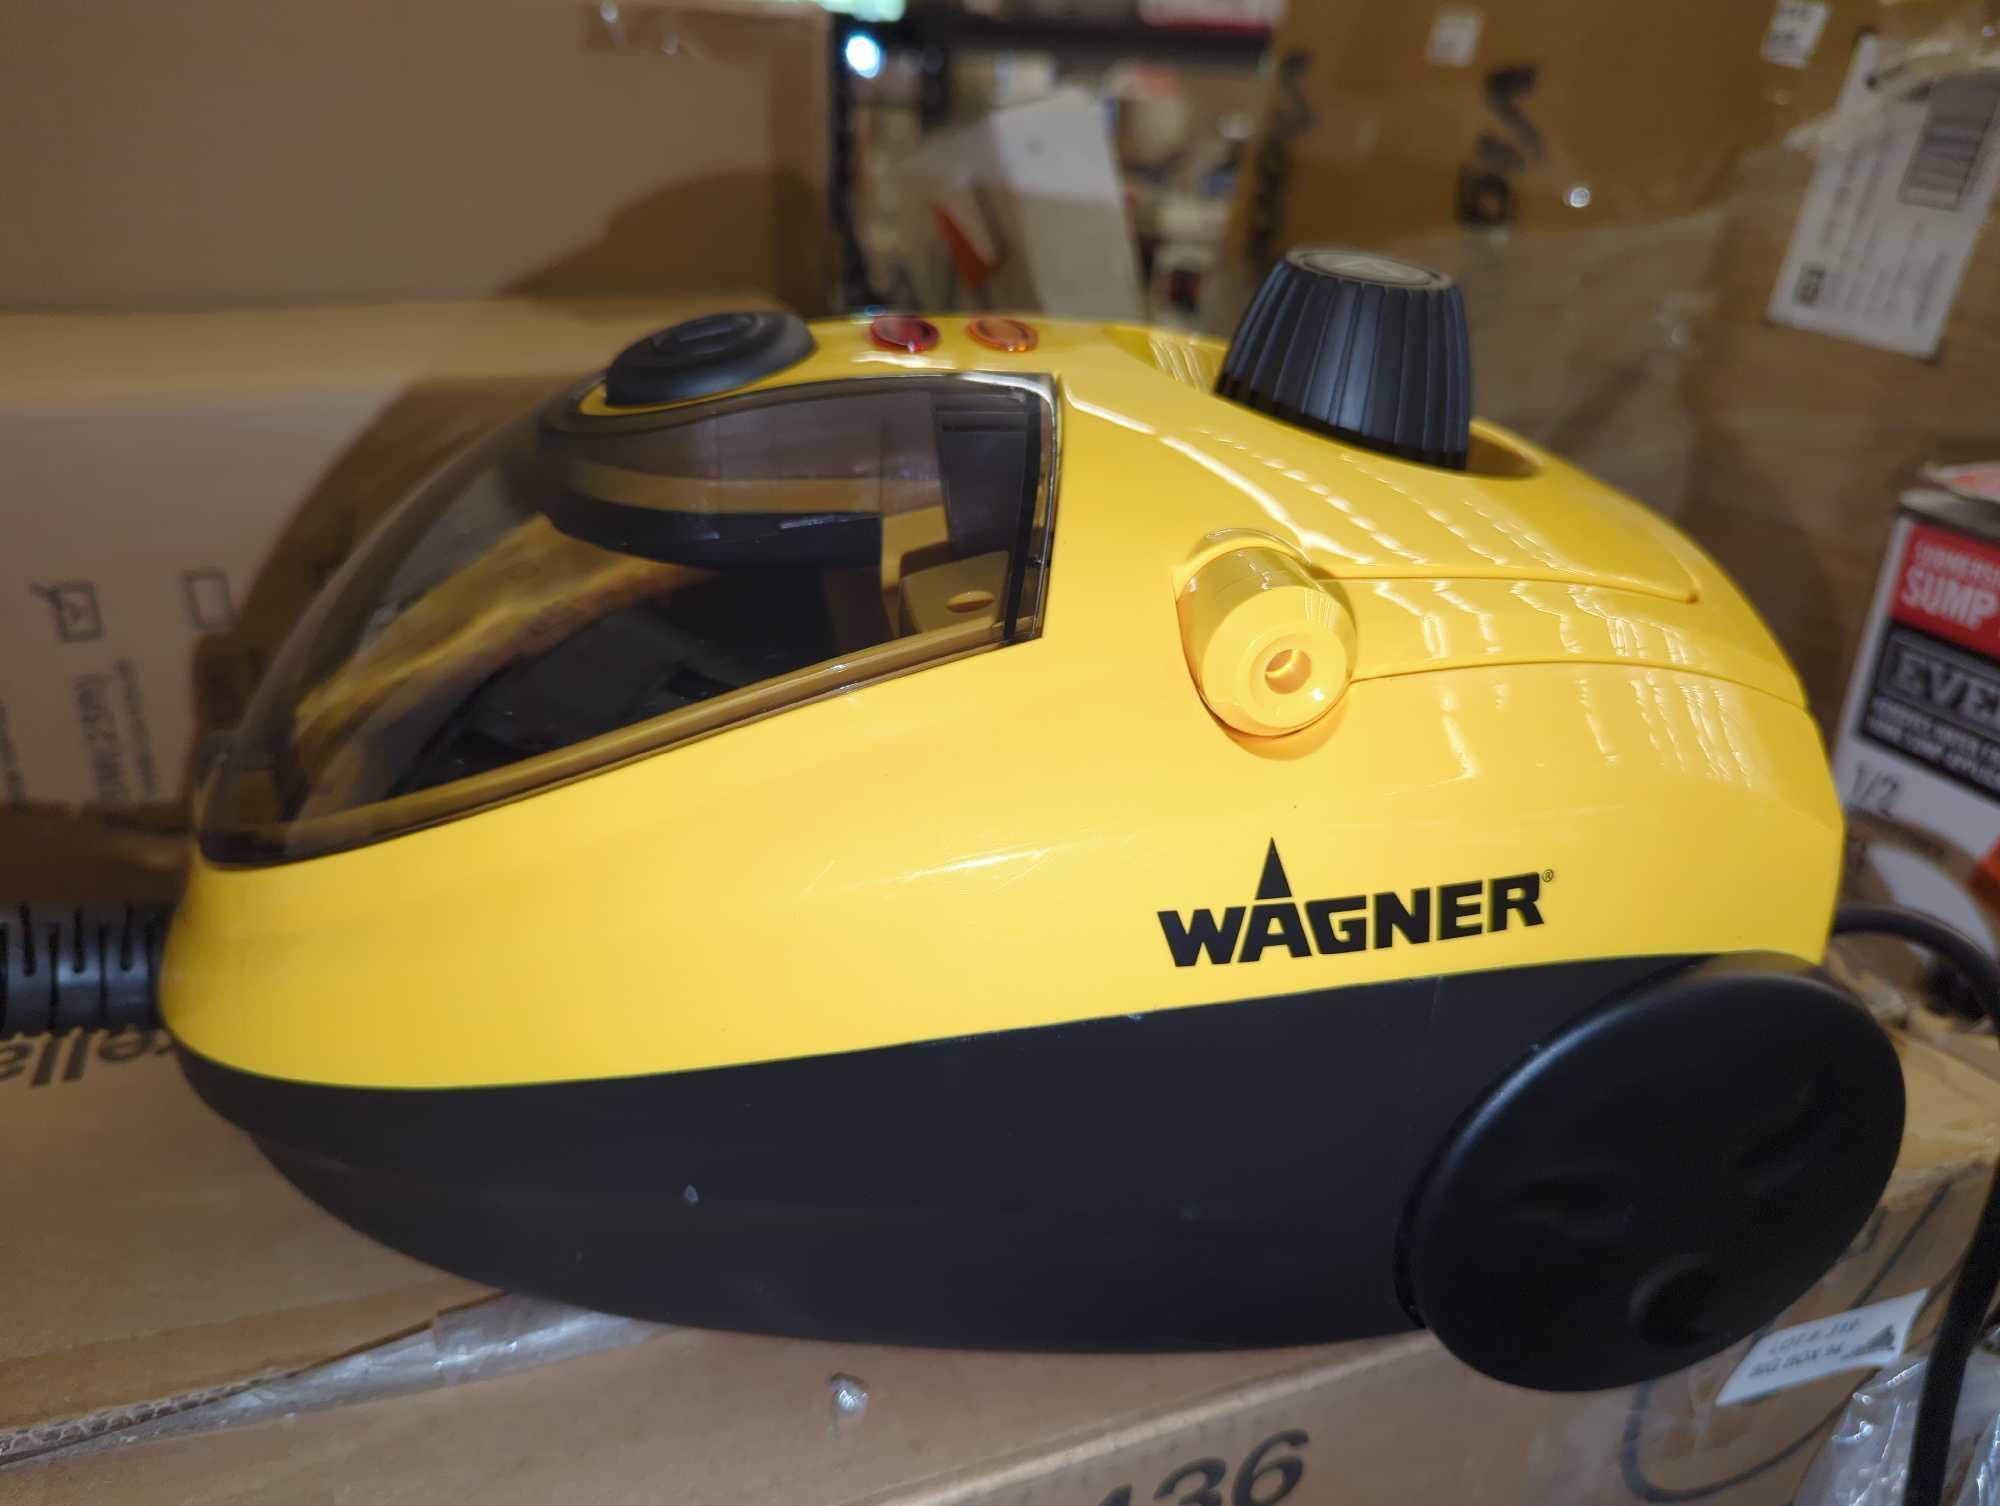 Wagner 915e Multi-Purpose On-Demand Steam Cleaner and Wallpaper Remover, Retail Price $145, Appears